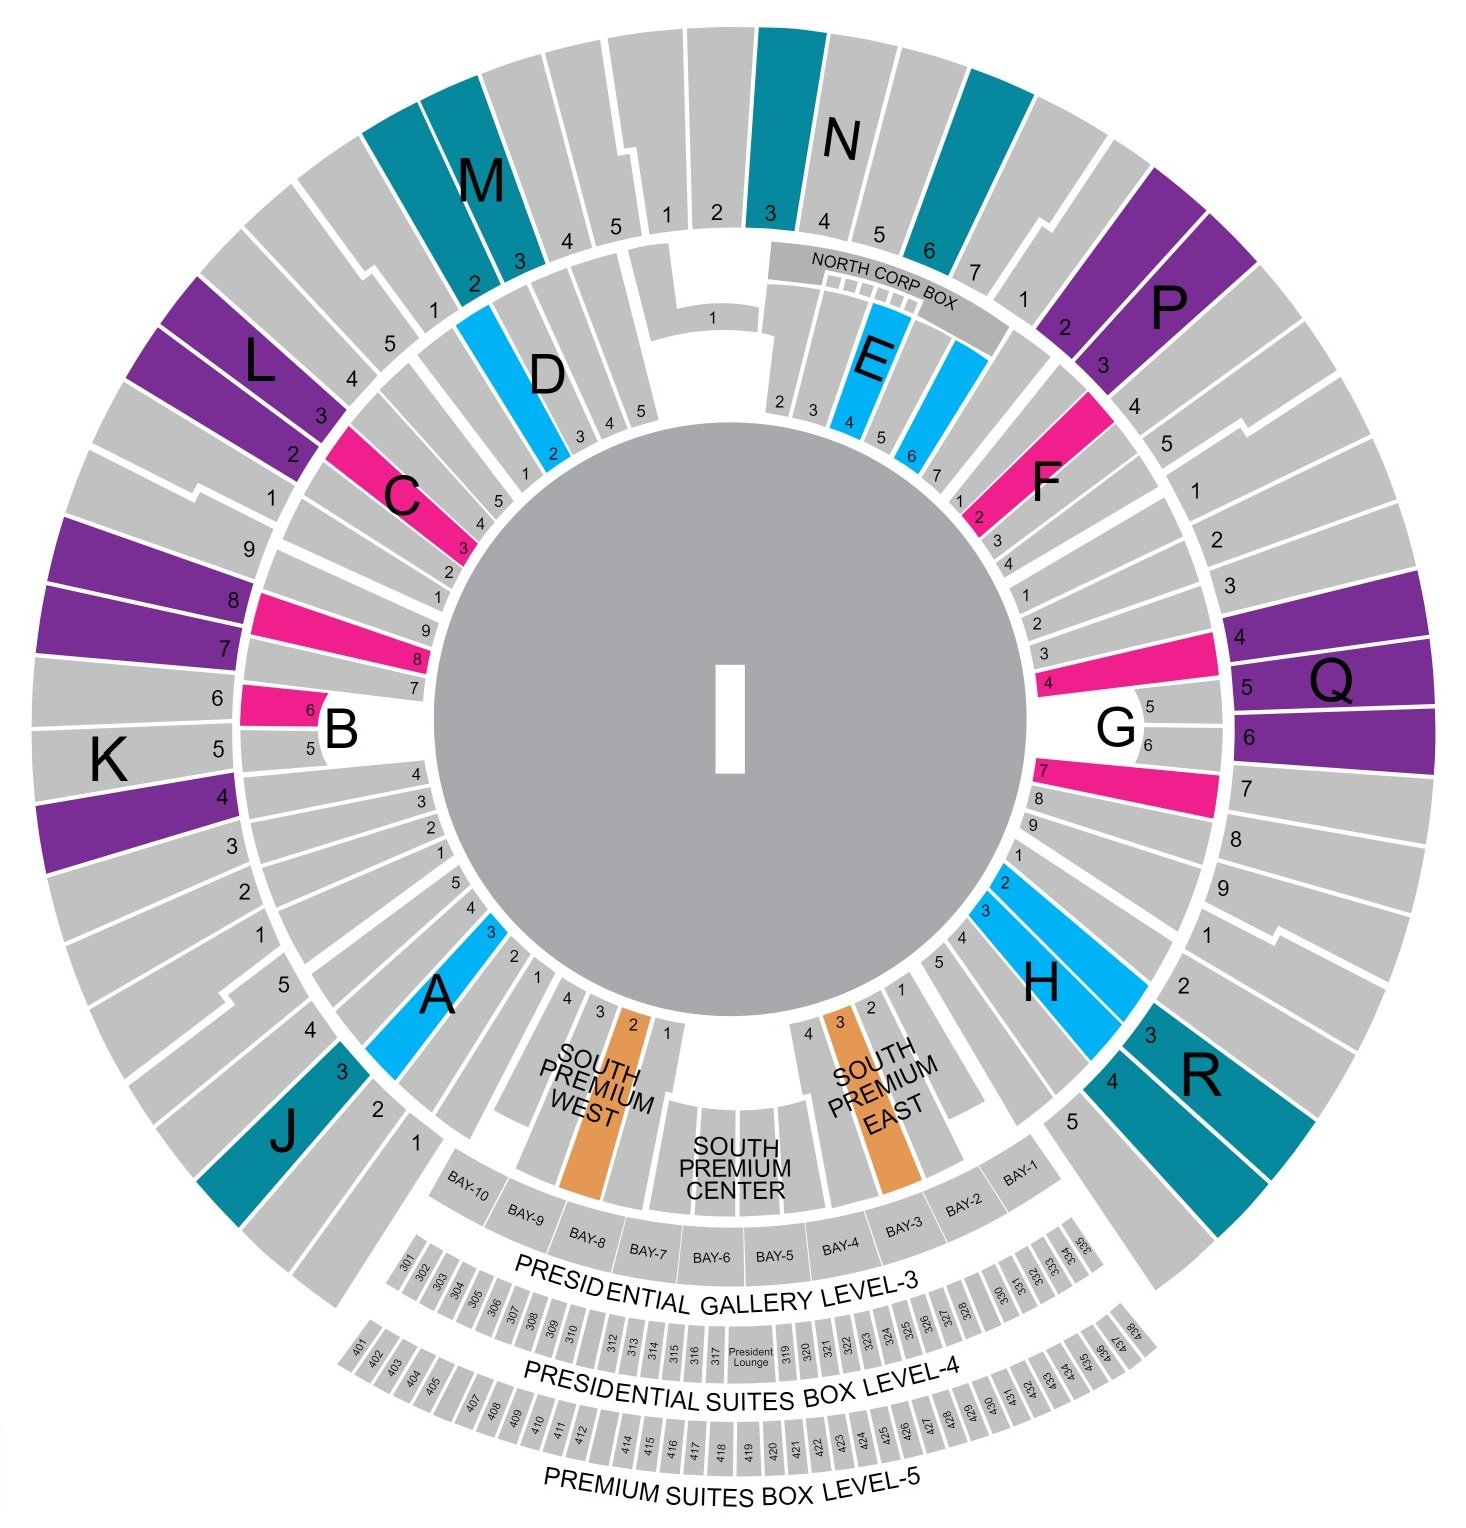 Narendra Modi Stadium Seating Plan with Rows and Stands